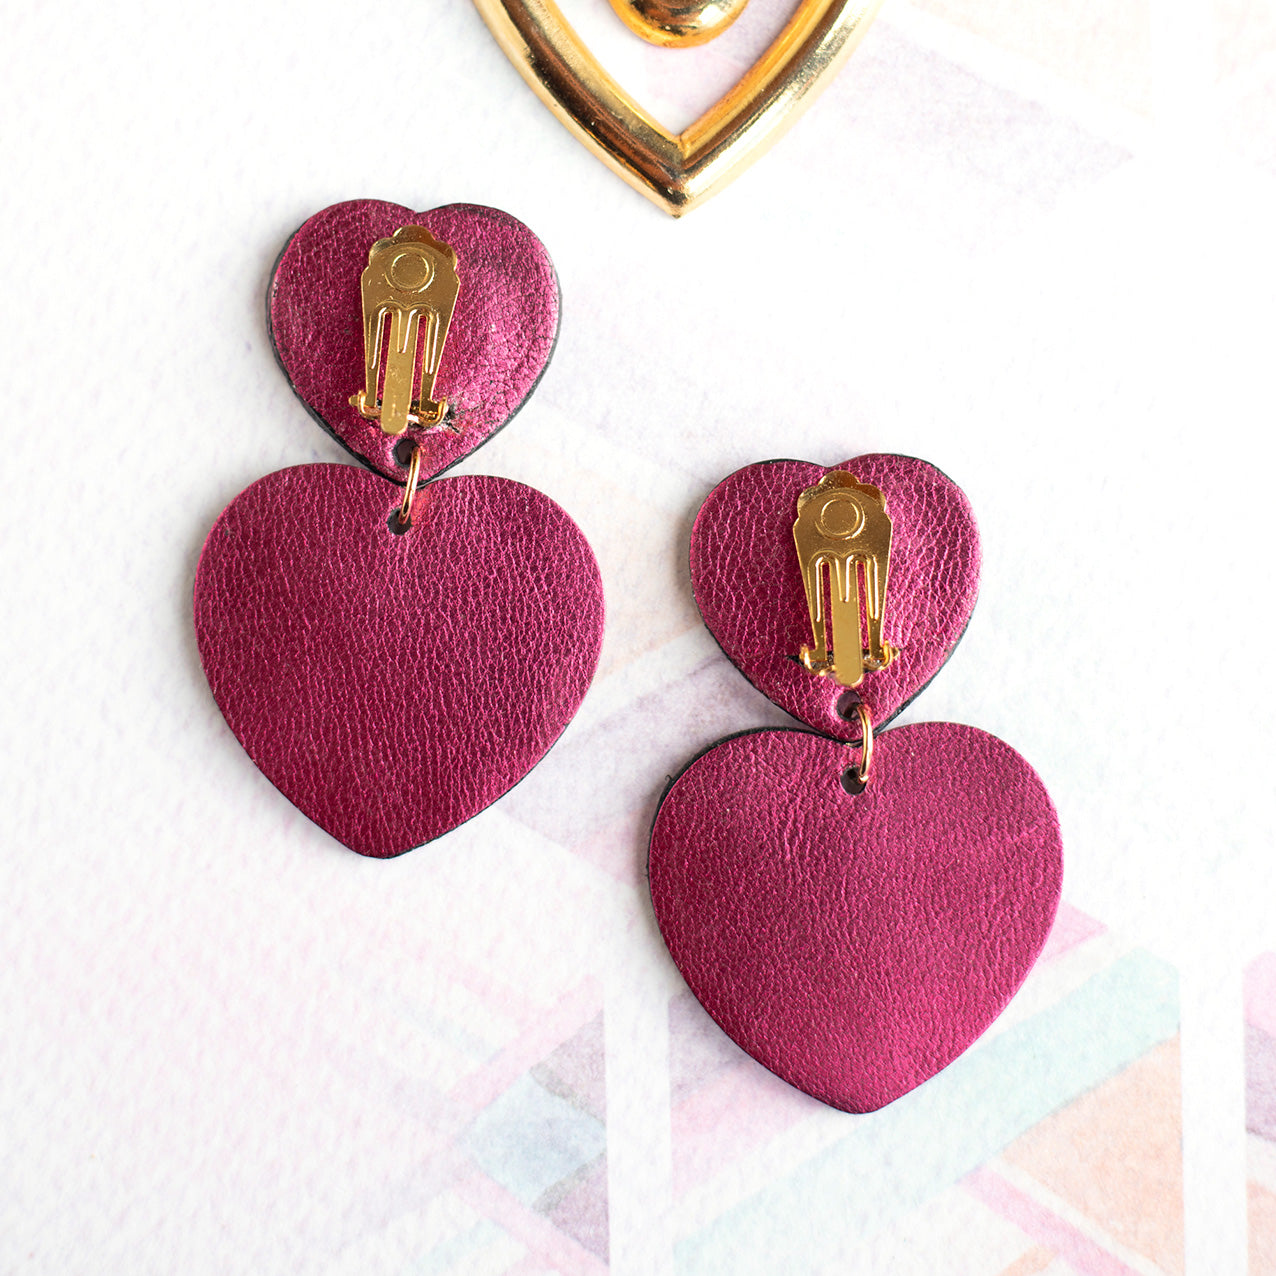 Double Hearts clip-on earrings - metallic raspberry and blue leather